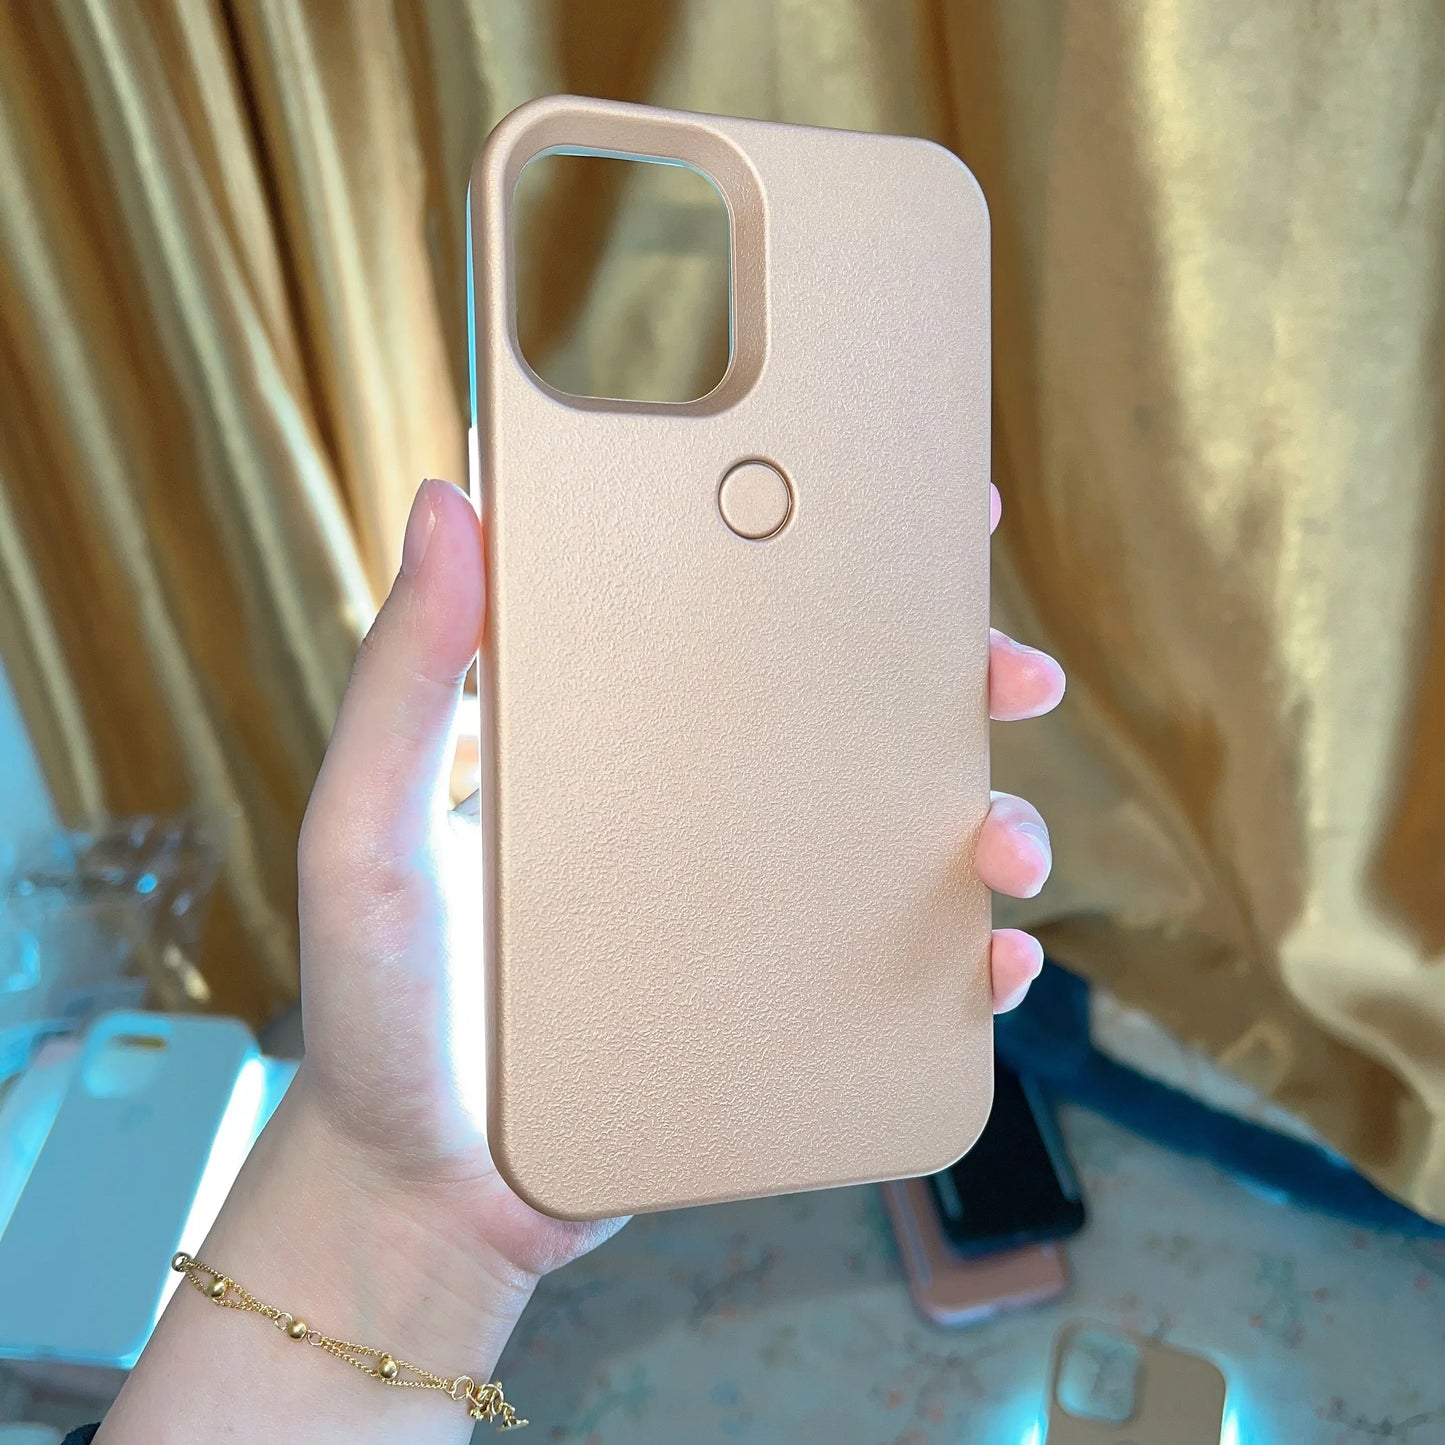 LED light Up case for iPhone